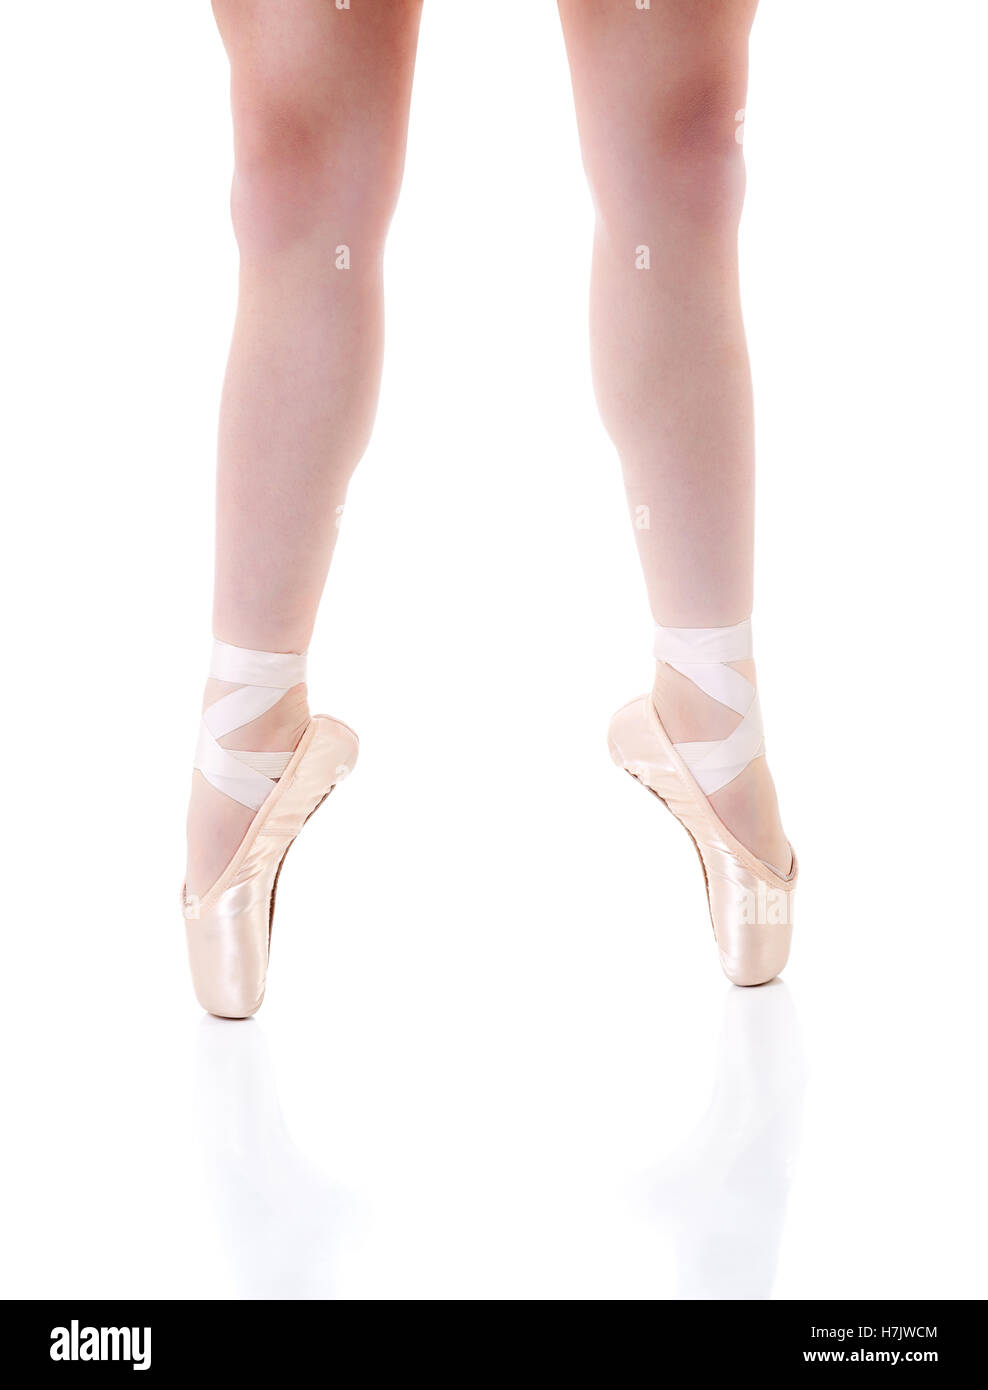 Focus on young ballerina's legs wearing pointe shoes with reflections. Isolated on white with copy space. Stock Photo